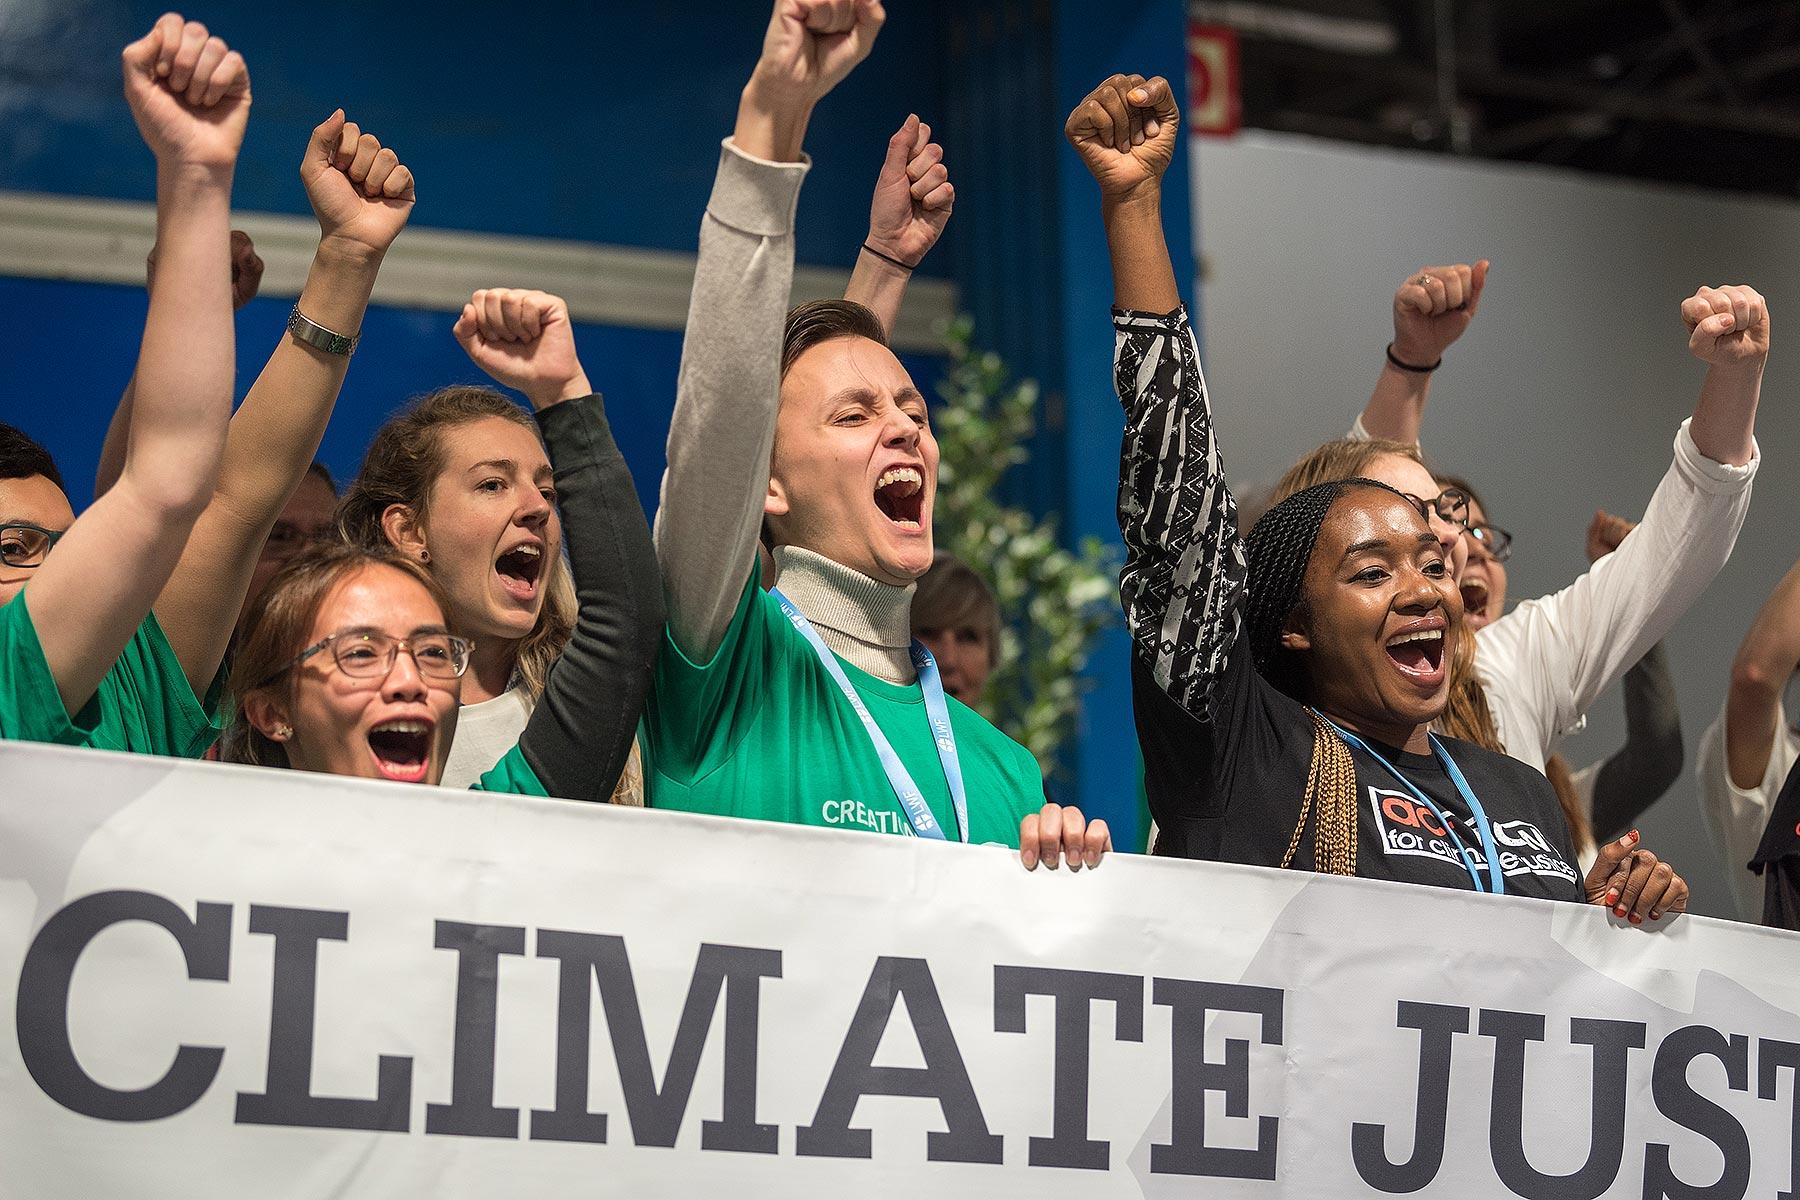 LWF delegates join ecumenical partners in calling for climate justice at COP25 in Madrid. All photos: LWF/Albin Hillert